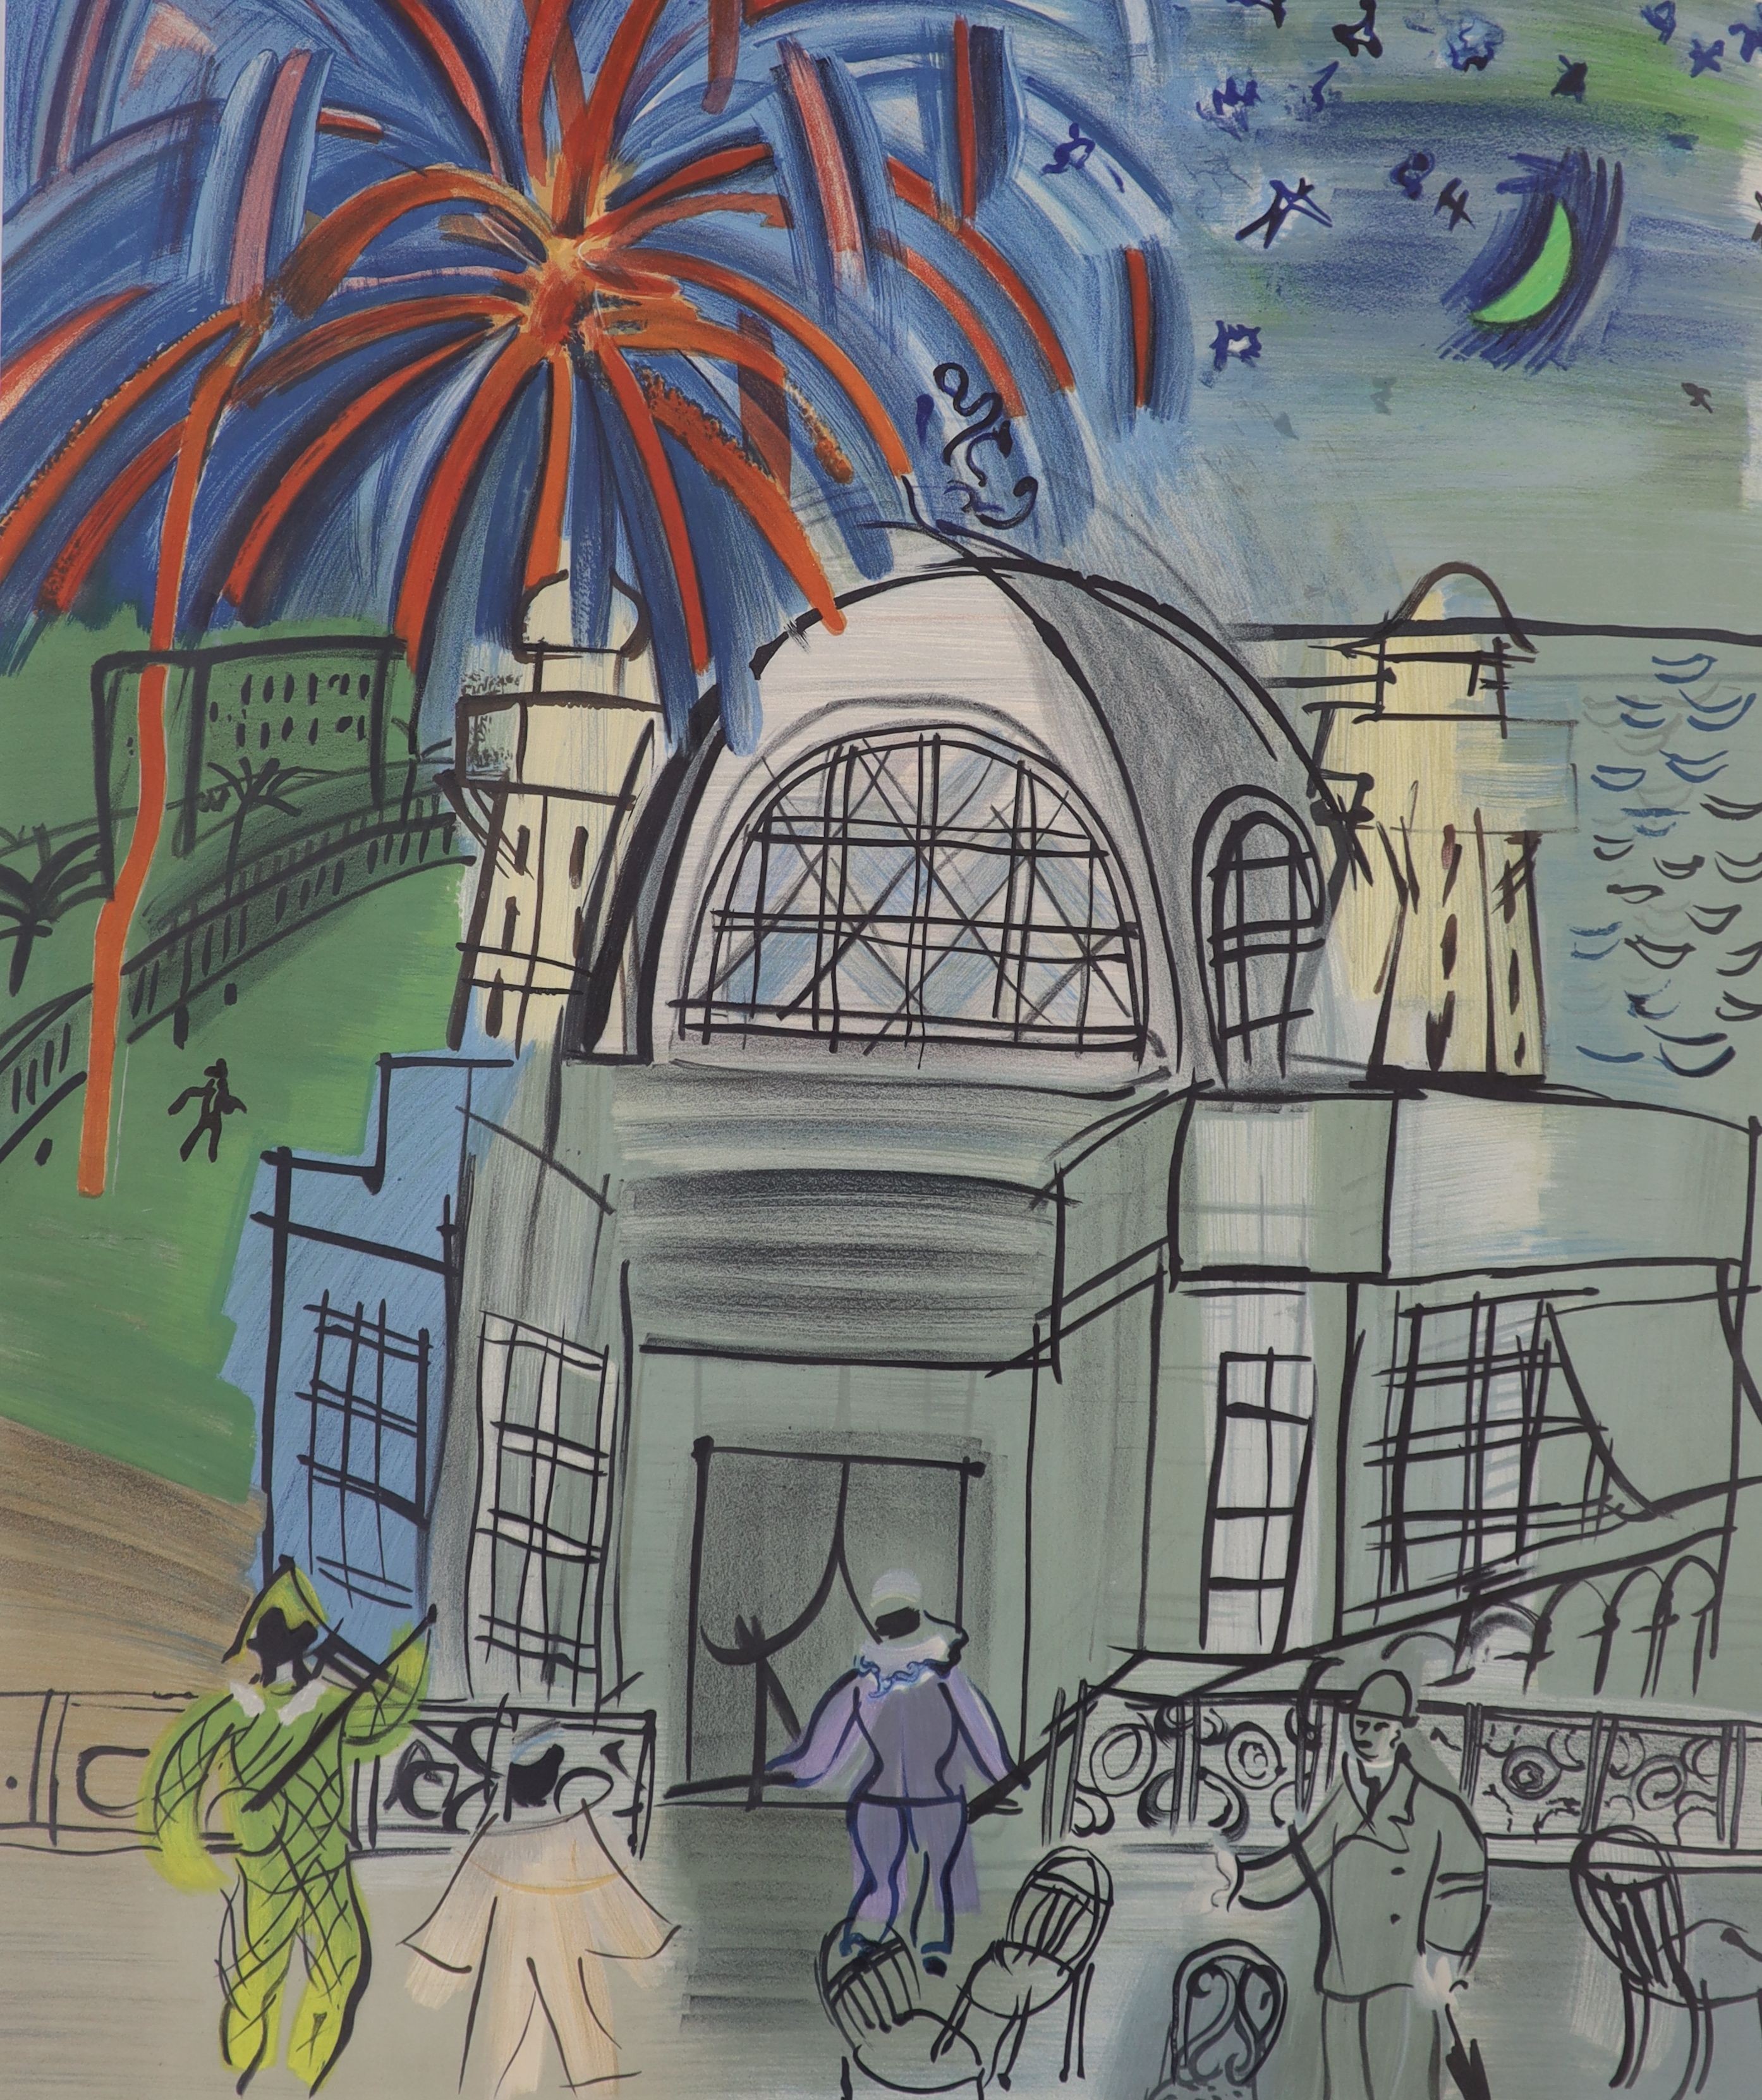 After Raoul Dufy, colour print, 'Fireworks in Nice', 53 x 44cm